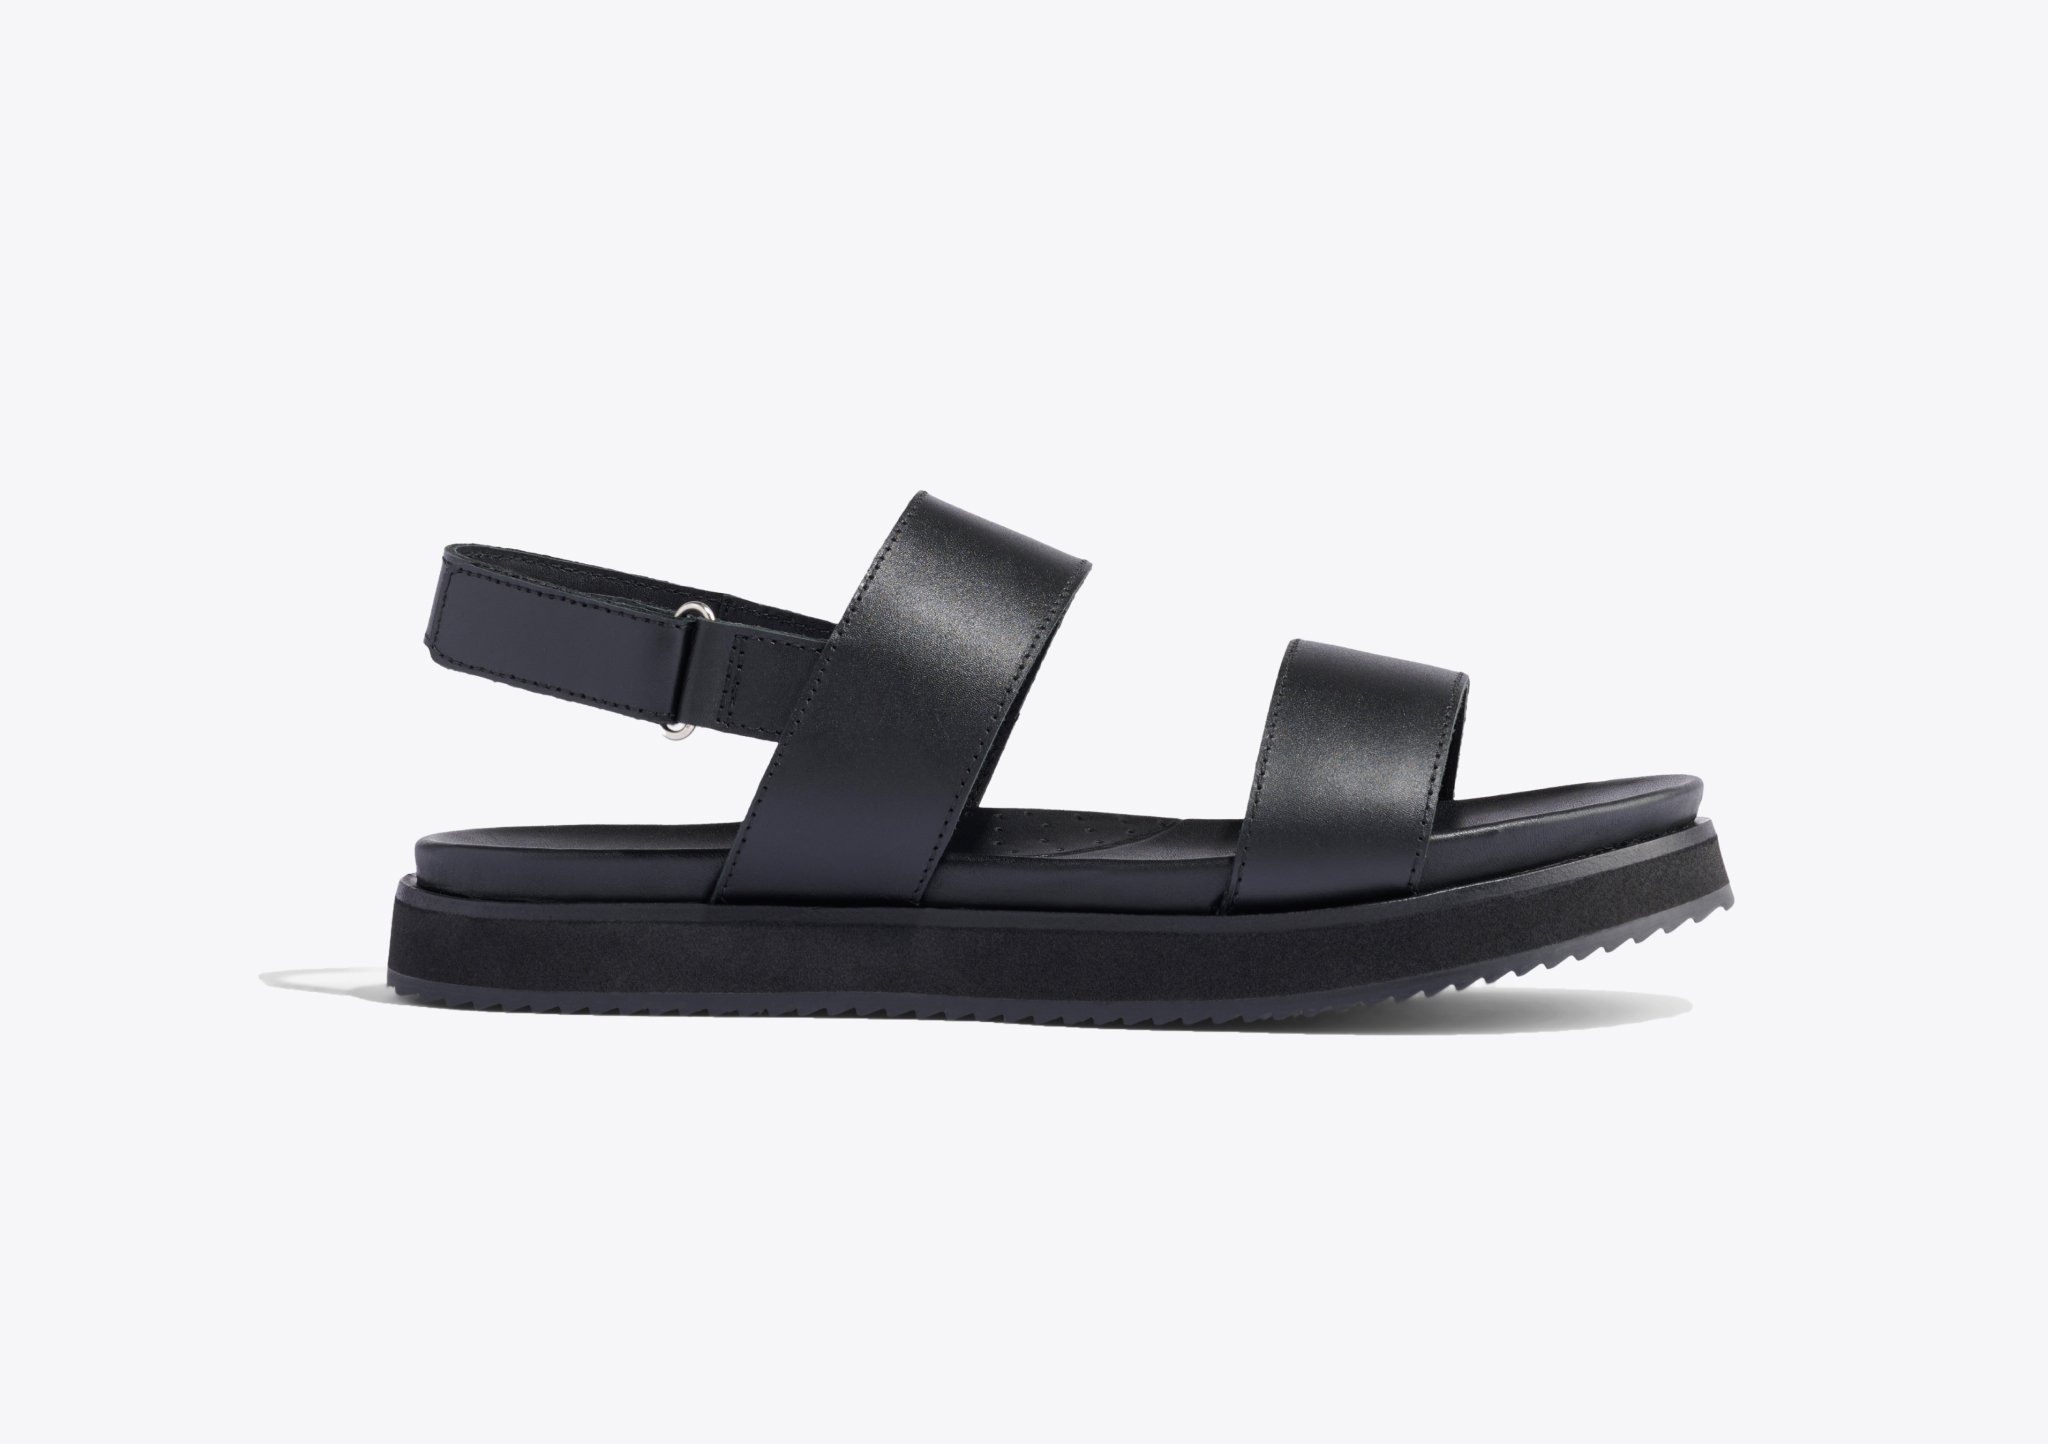 Nisolo Go-To Flatform Sandal 2.0 Black/Black - Every Nisolo product is built on the foundation of comfort, function, and design. 